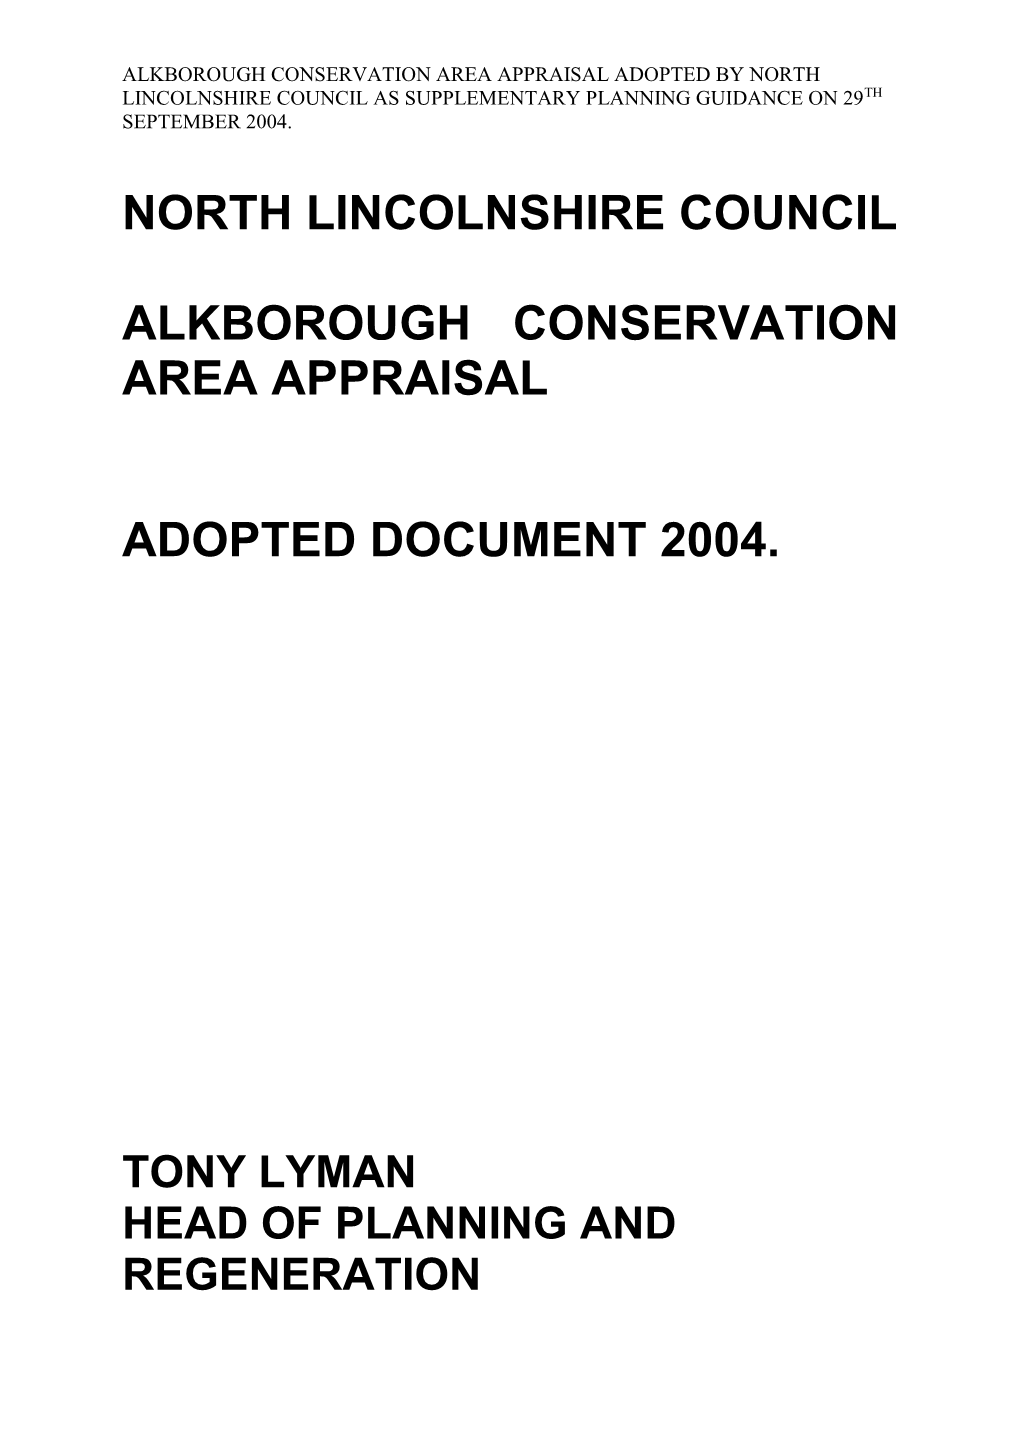 Alkborough Conservation Area Appraisal Adopted by North Lincolnshire Council As Supplementary Planning Guidance on 29Th September 2004